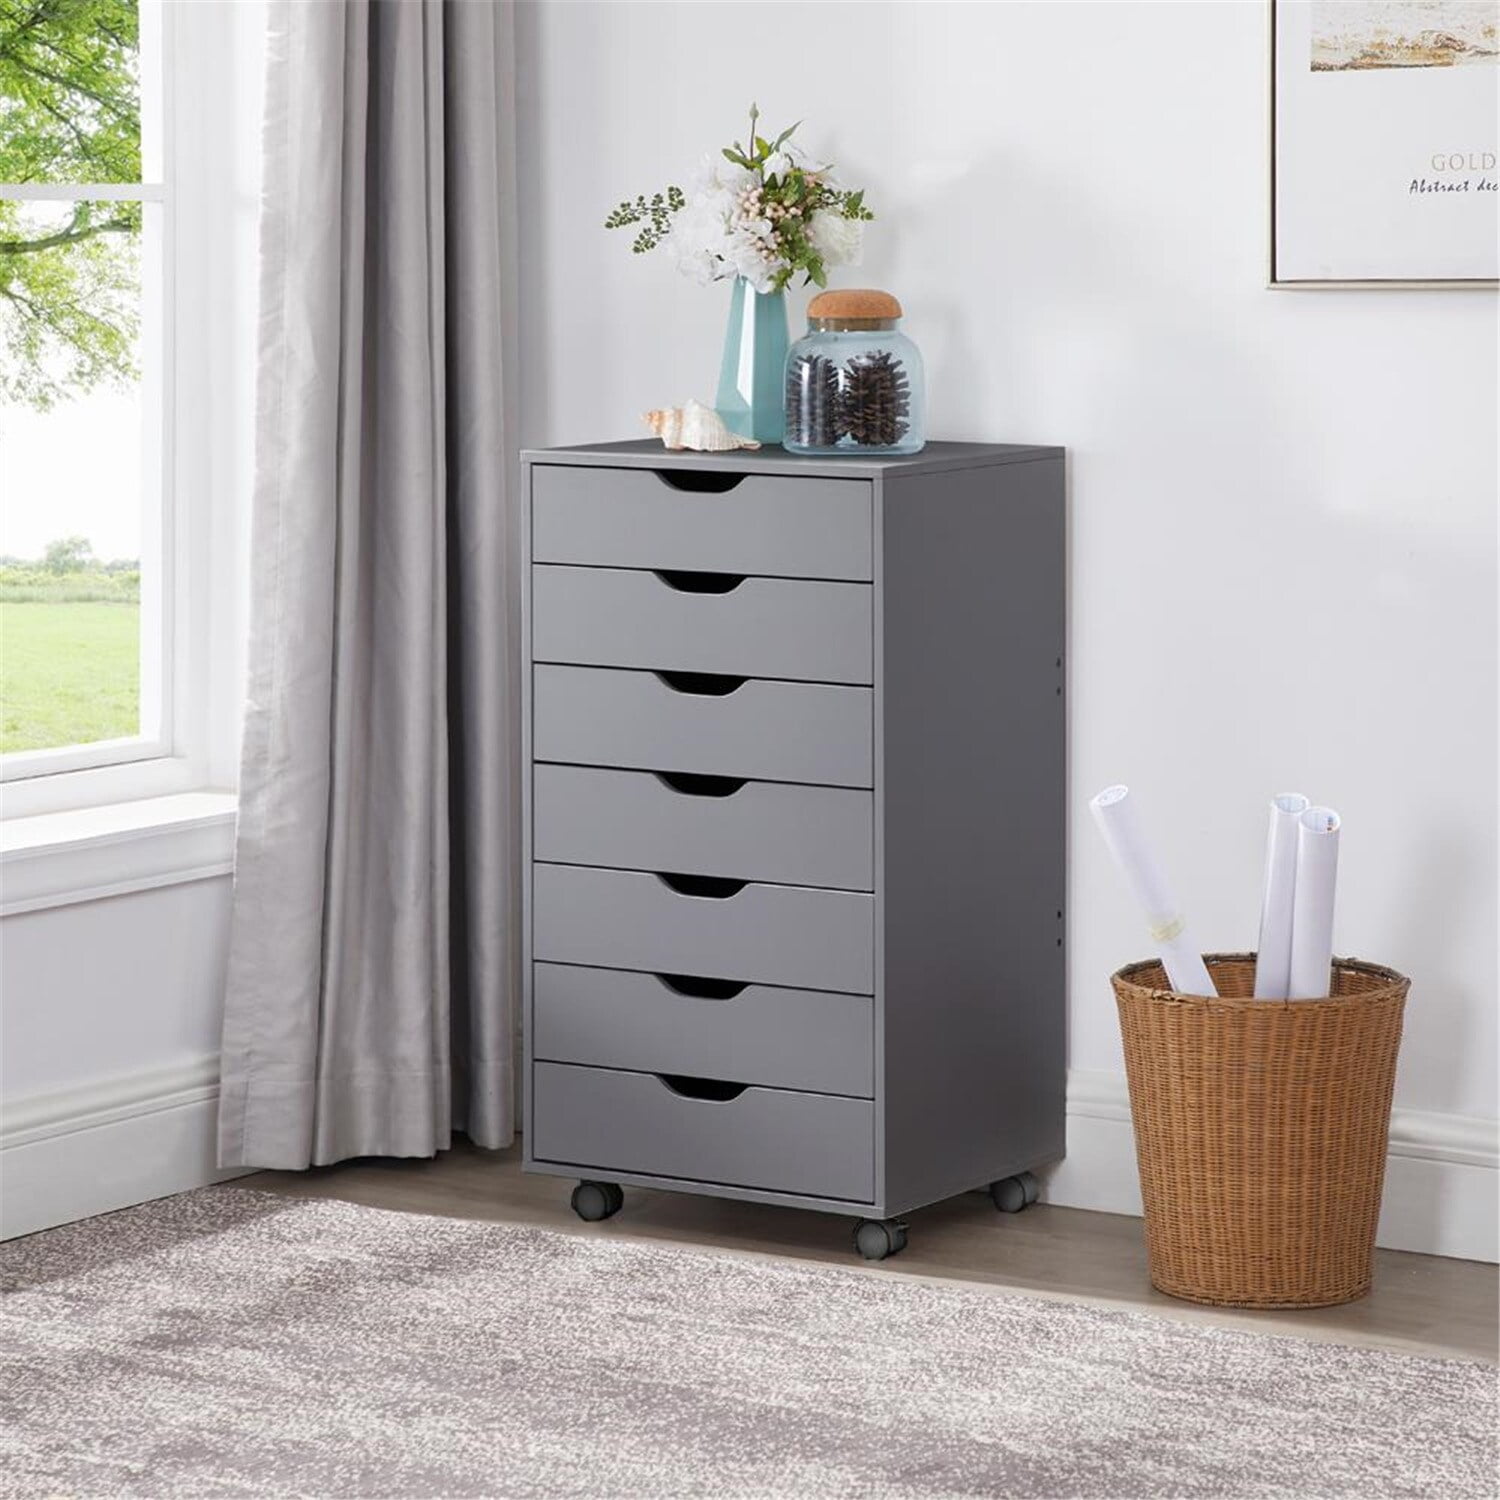 Office File Cabinets Wooden File Cabinets for Home Office Lateral File Cabinet File Cabinet Mobile Storage Drawer Cabinet - Grey Grey - image 1 of 5